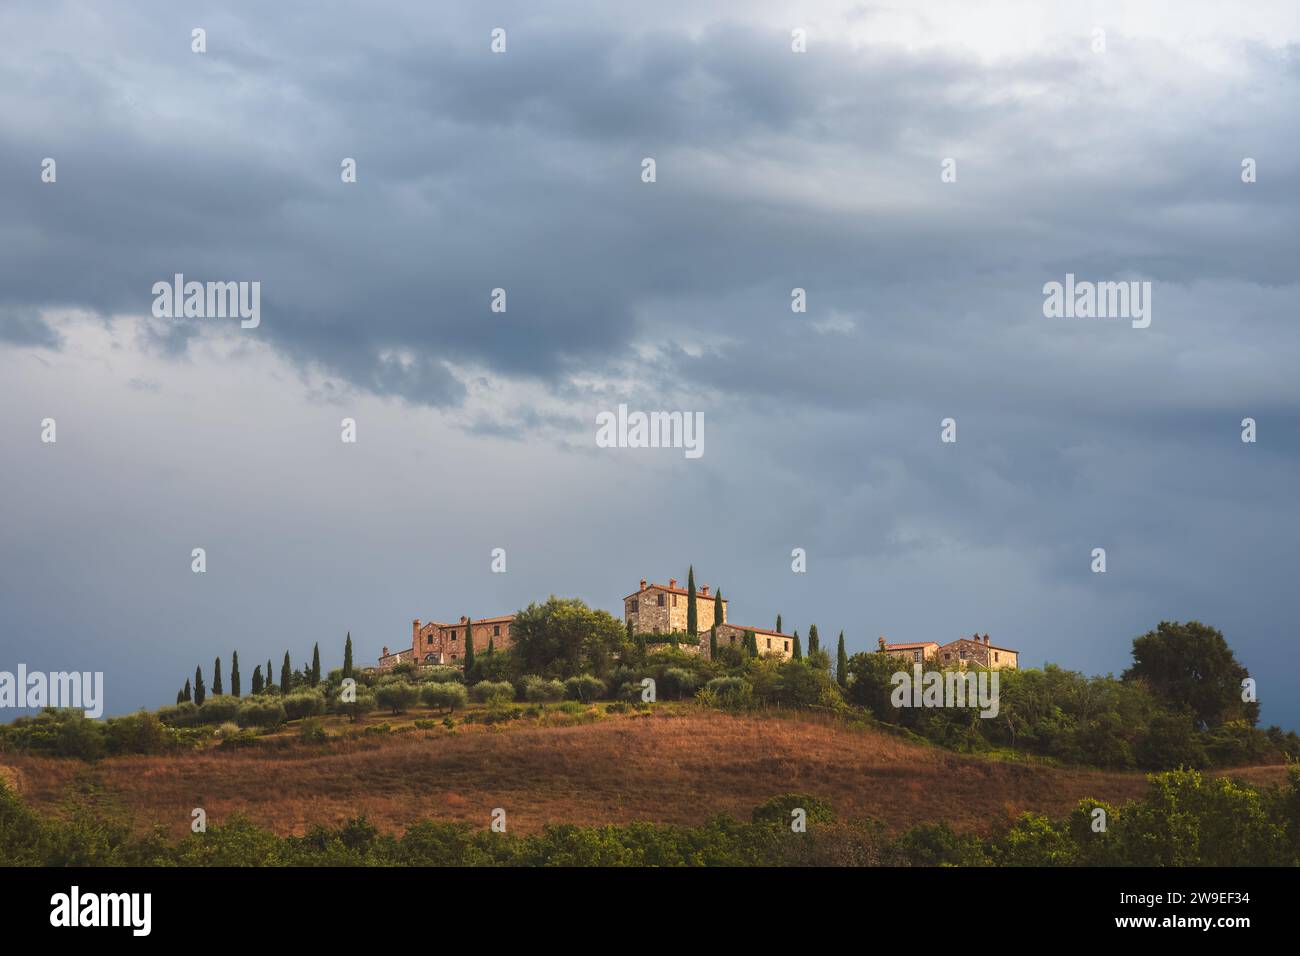 Moody, atmospheric light and dark dramatic sky over lone rustic stone farmhouse in the scenic countryside landscape of rolling hills and farmland of r Stock Photo